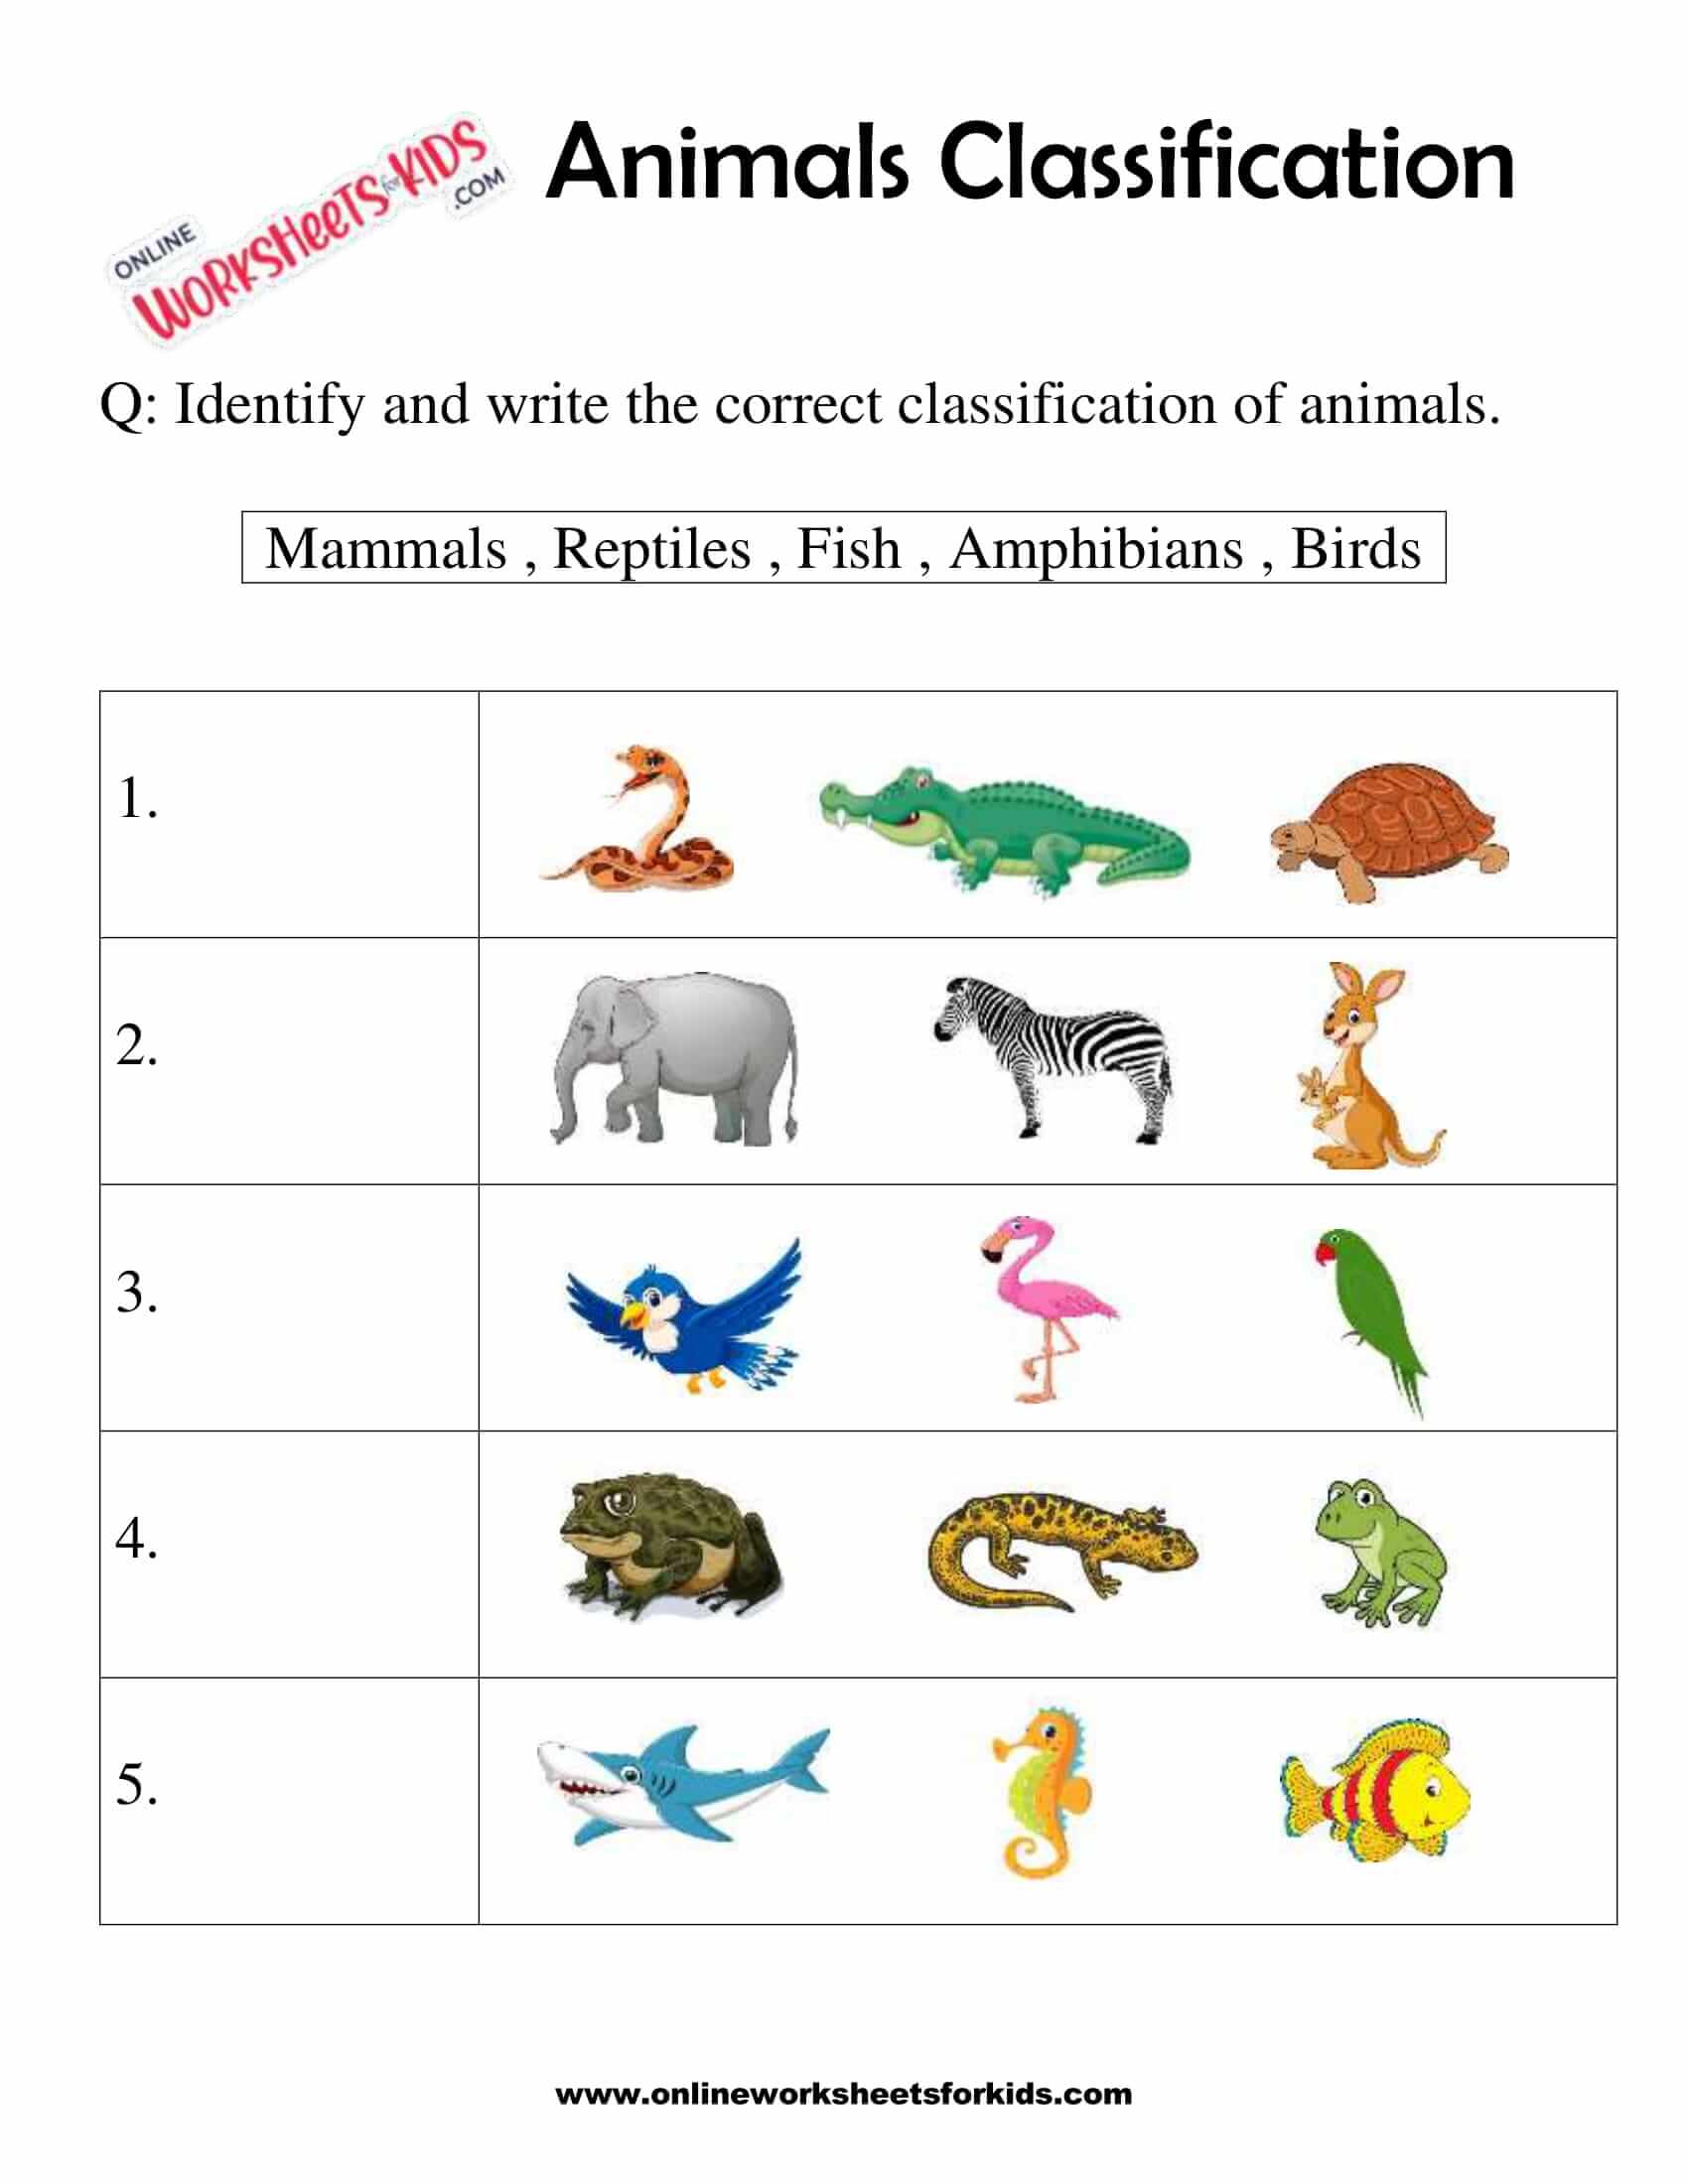 animals-classification-worksheet-for-1st-grade-5